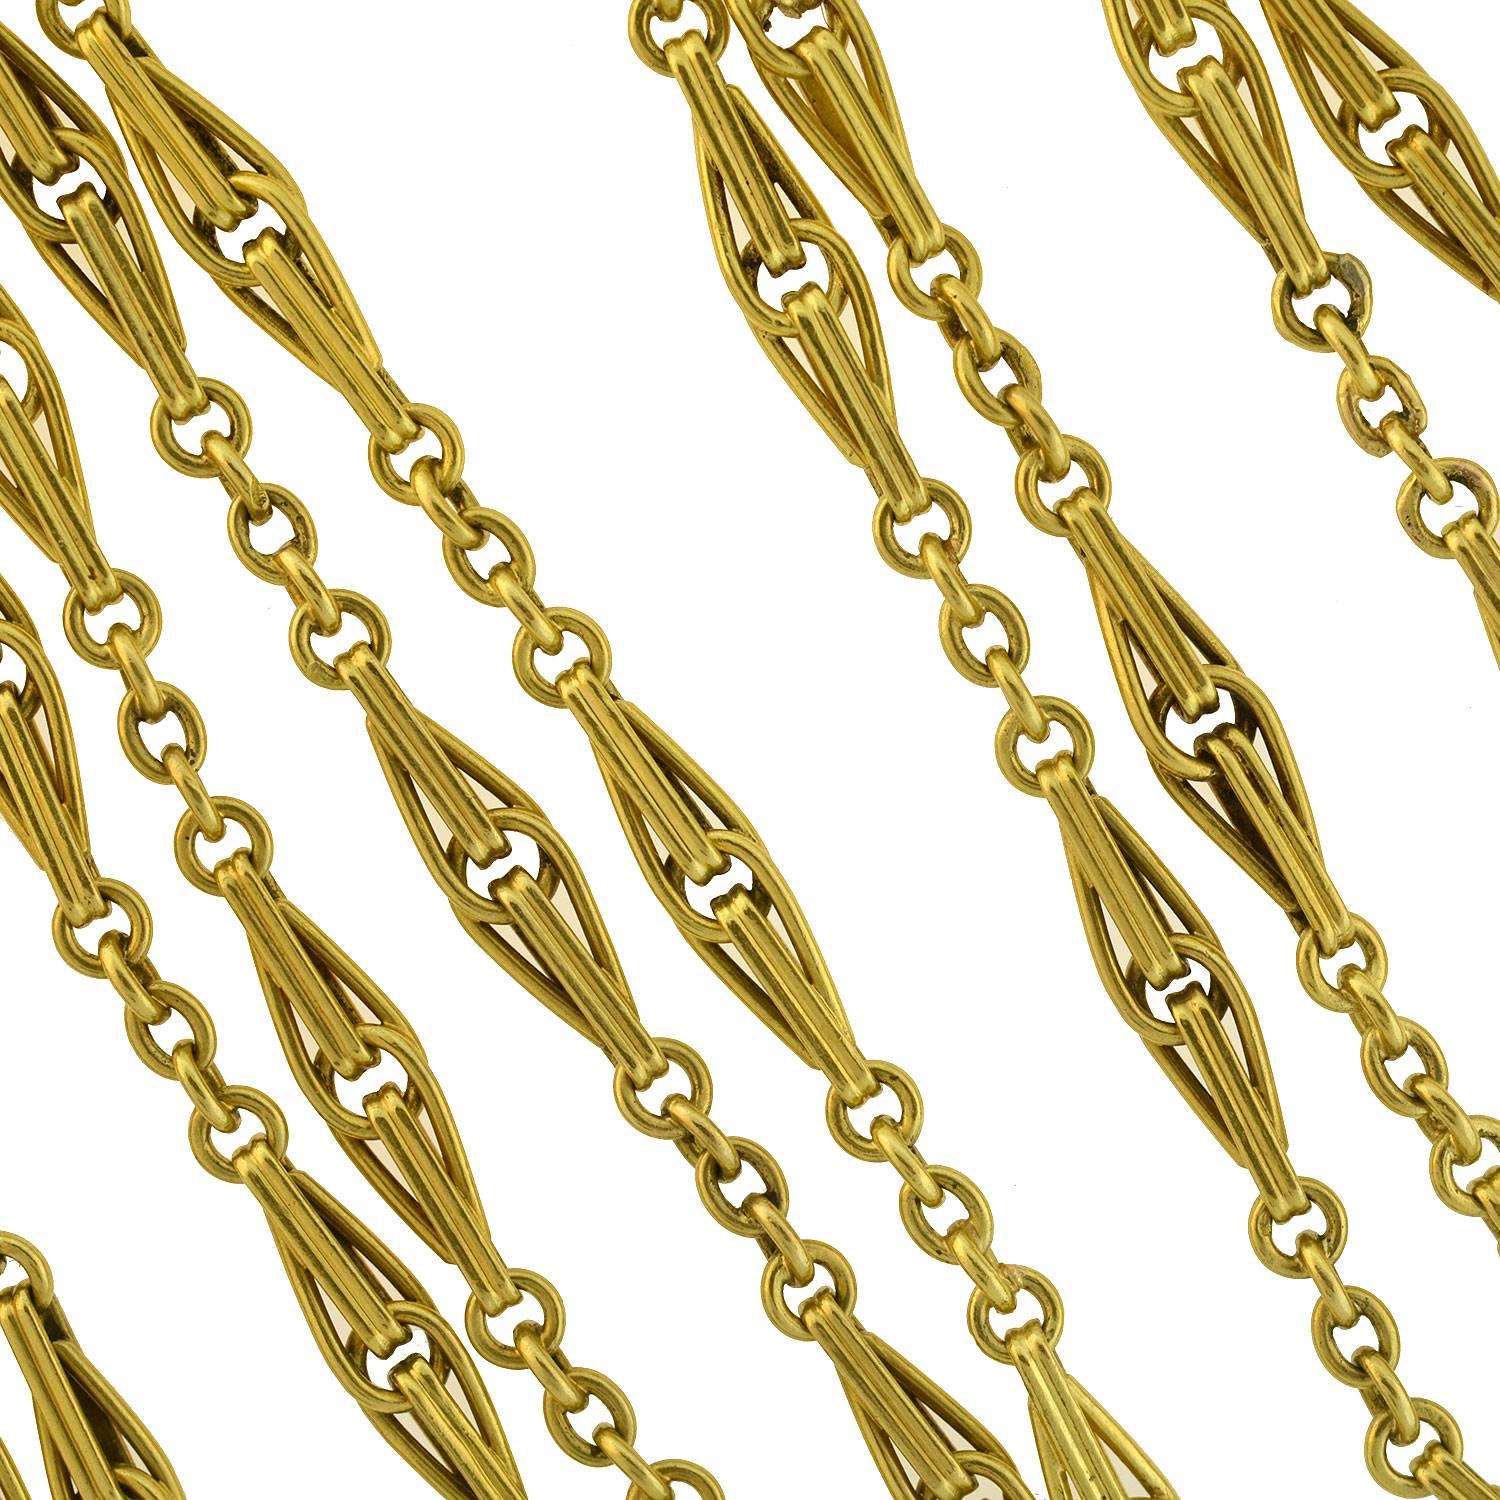 An absolutely exquisite gold chain from the late Victorian (ca1900) era! Extremely generous in length and heavy in weight, the chain is comprised of ornate 18kt yellow gold links, which have a simple and beautiful design. The interlocking elongated